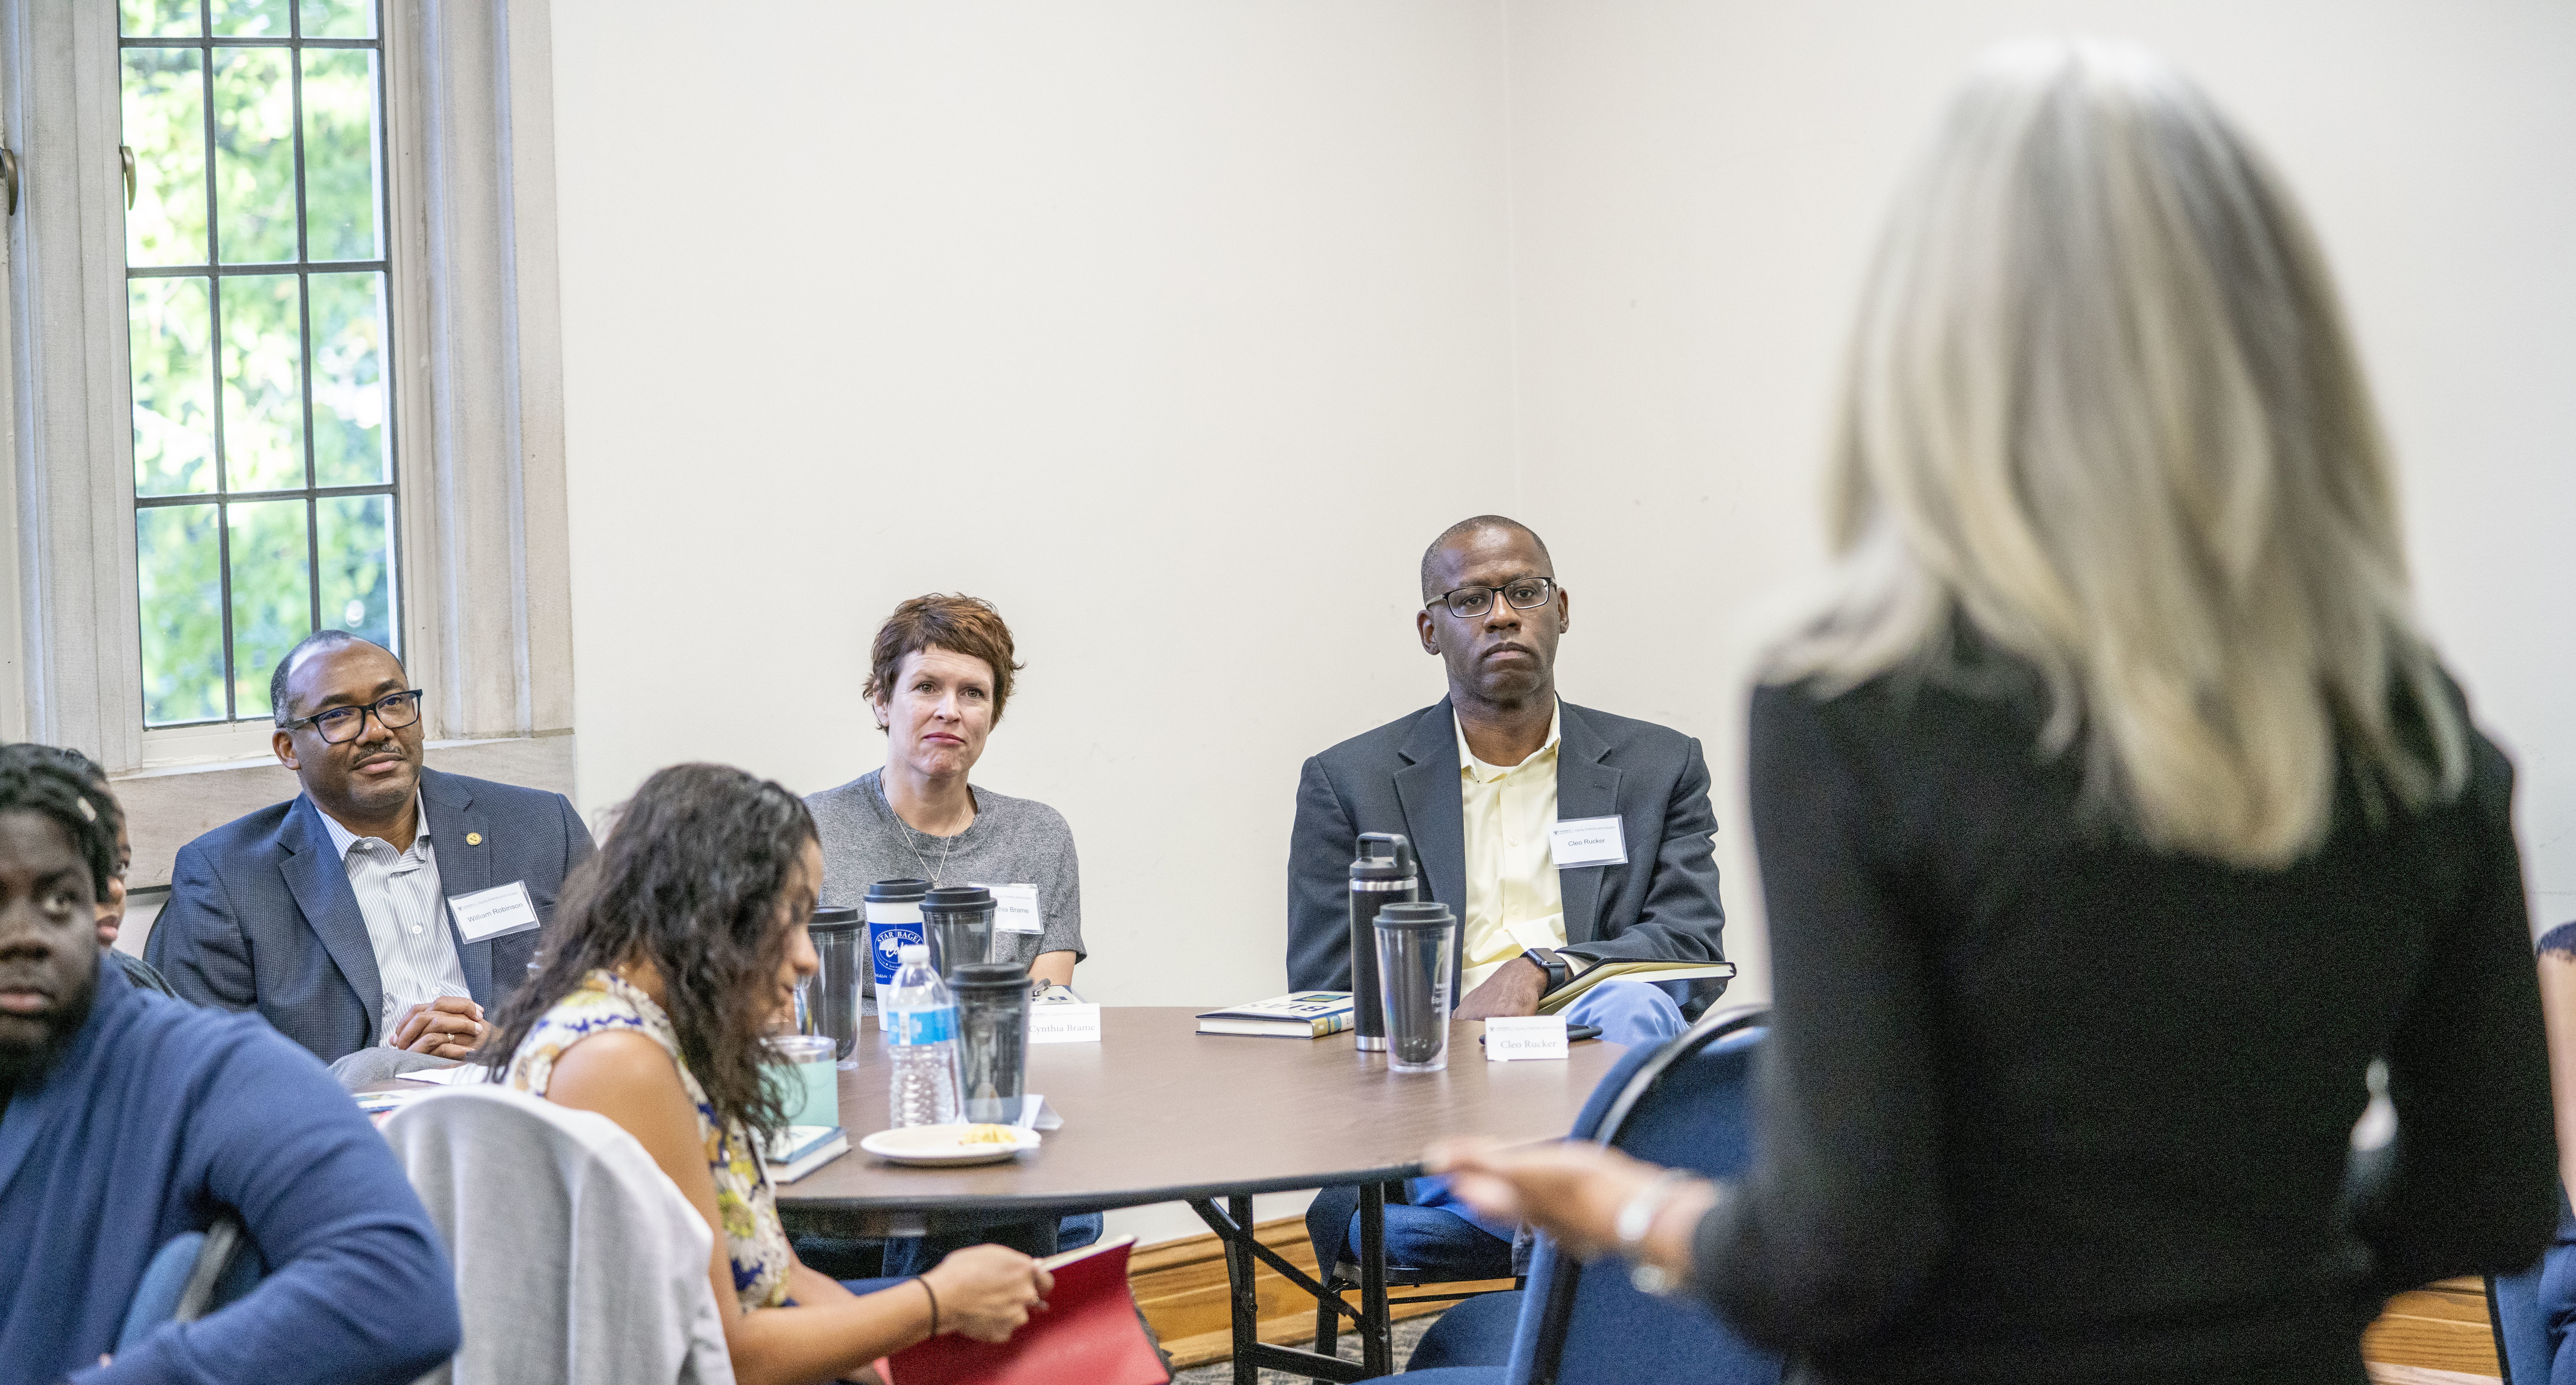 16 individuals from across the university participated in an unconscious bias train-the-trainer workshop over four days at Scarritt Bennet Center (John Russell/Vanderbilt University)